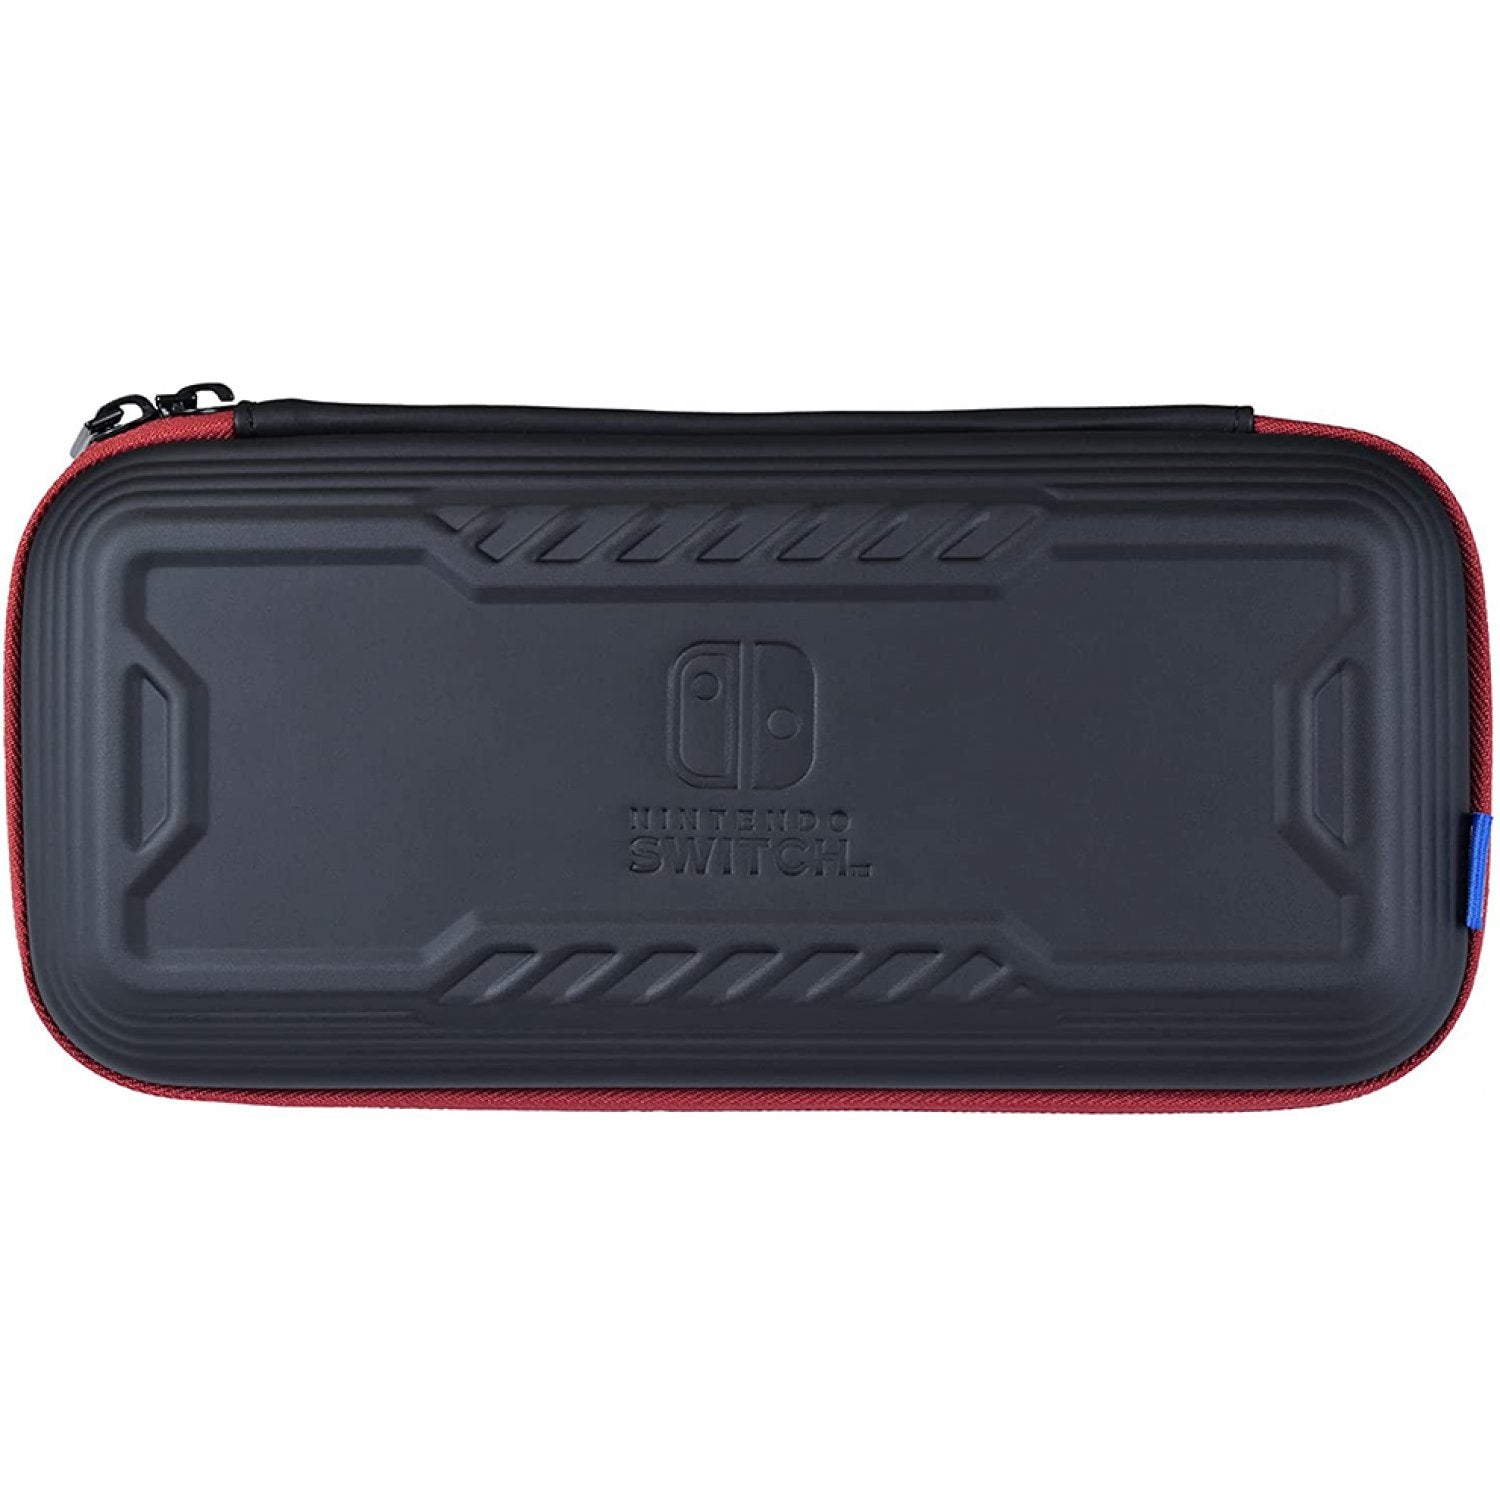 HORI NSW OLED Shock Absorption Tough Pouch Black/Red (NSW-815)